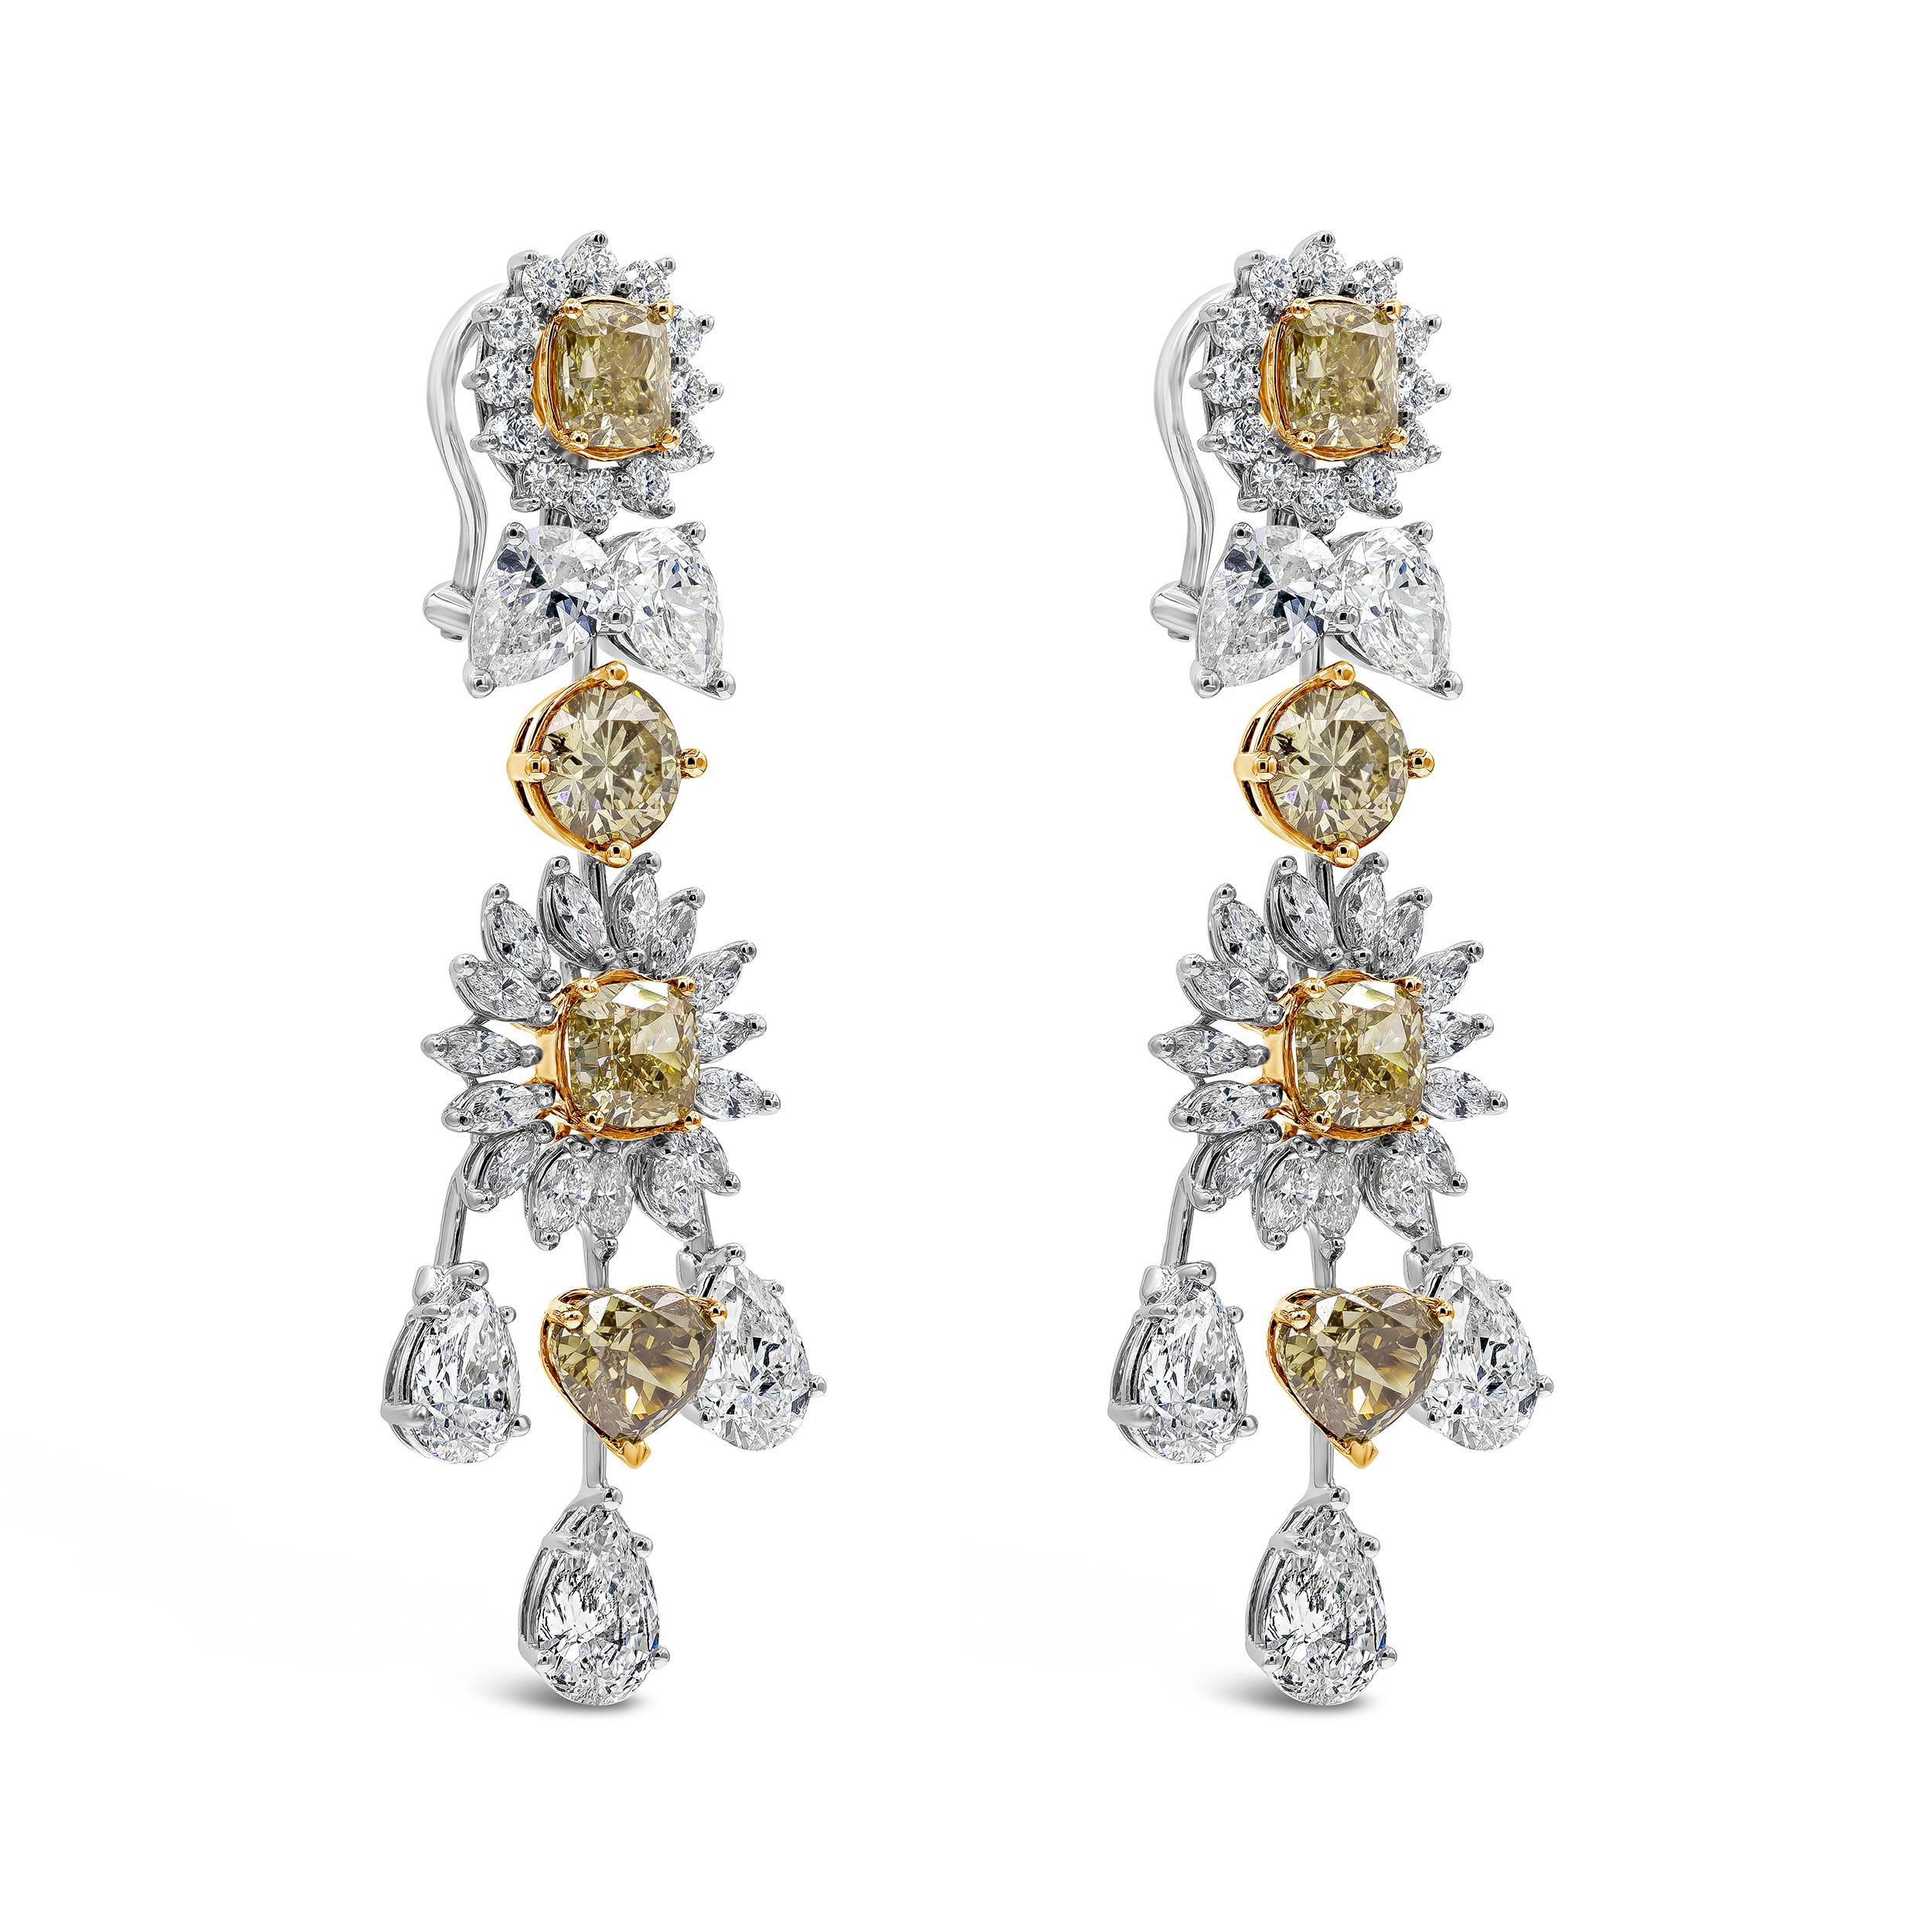 A brilliant piece of chandelier style earrings showcasing a brownish cognac diamond in mixed fancy shapes weighing 11.99 carats total. Accented by a variety of fancy shape diamonds weighing 14.35 carats total. An outstanding piece of jewelry. Made